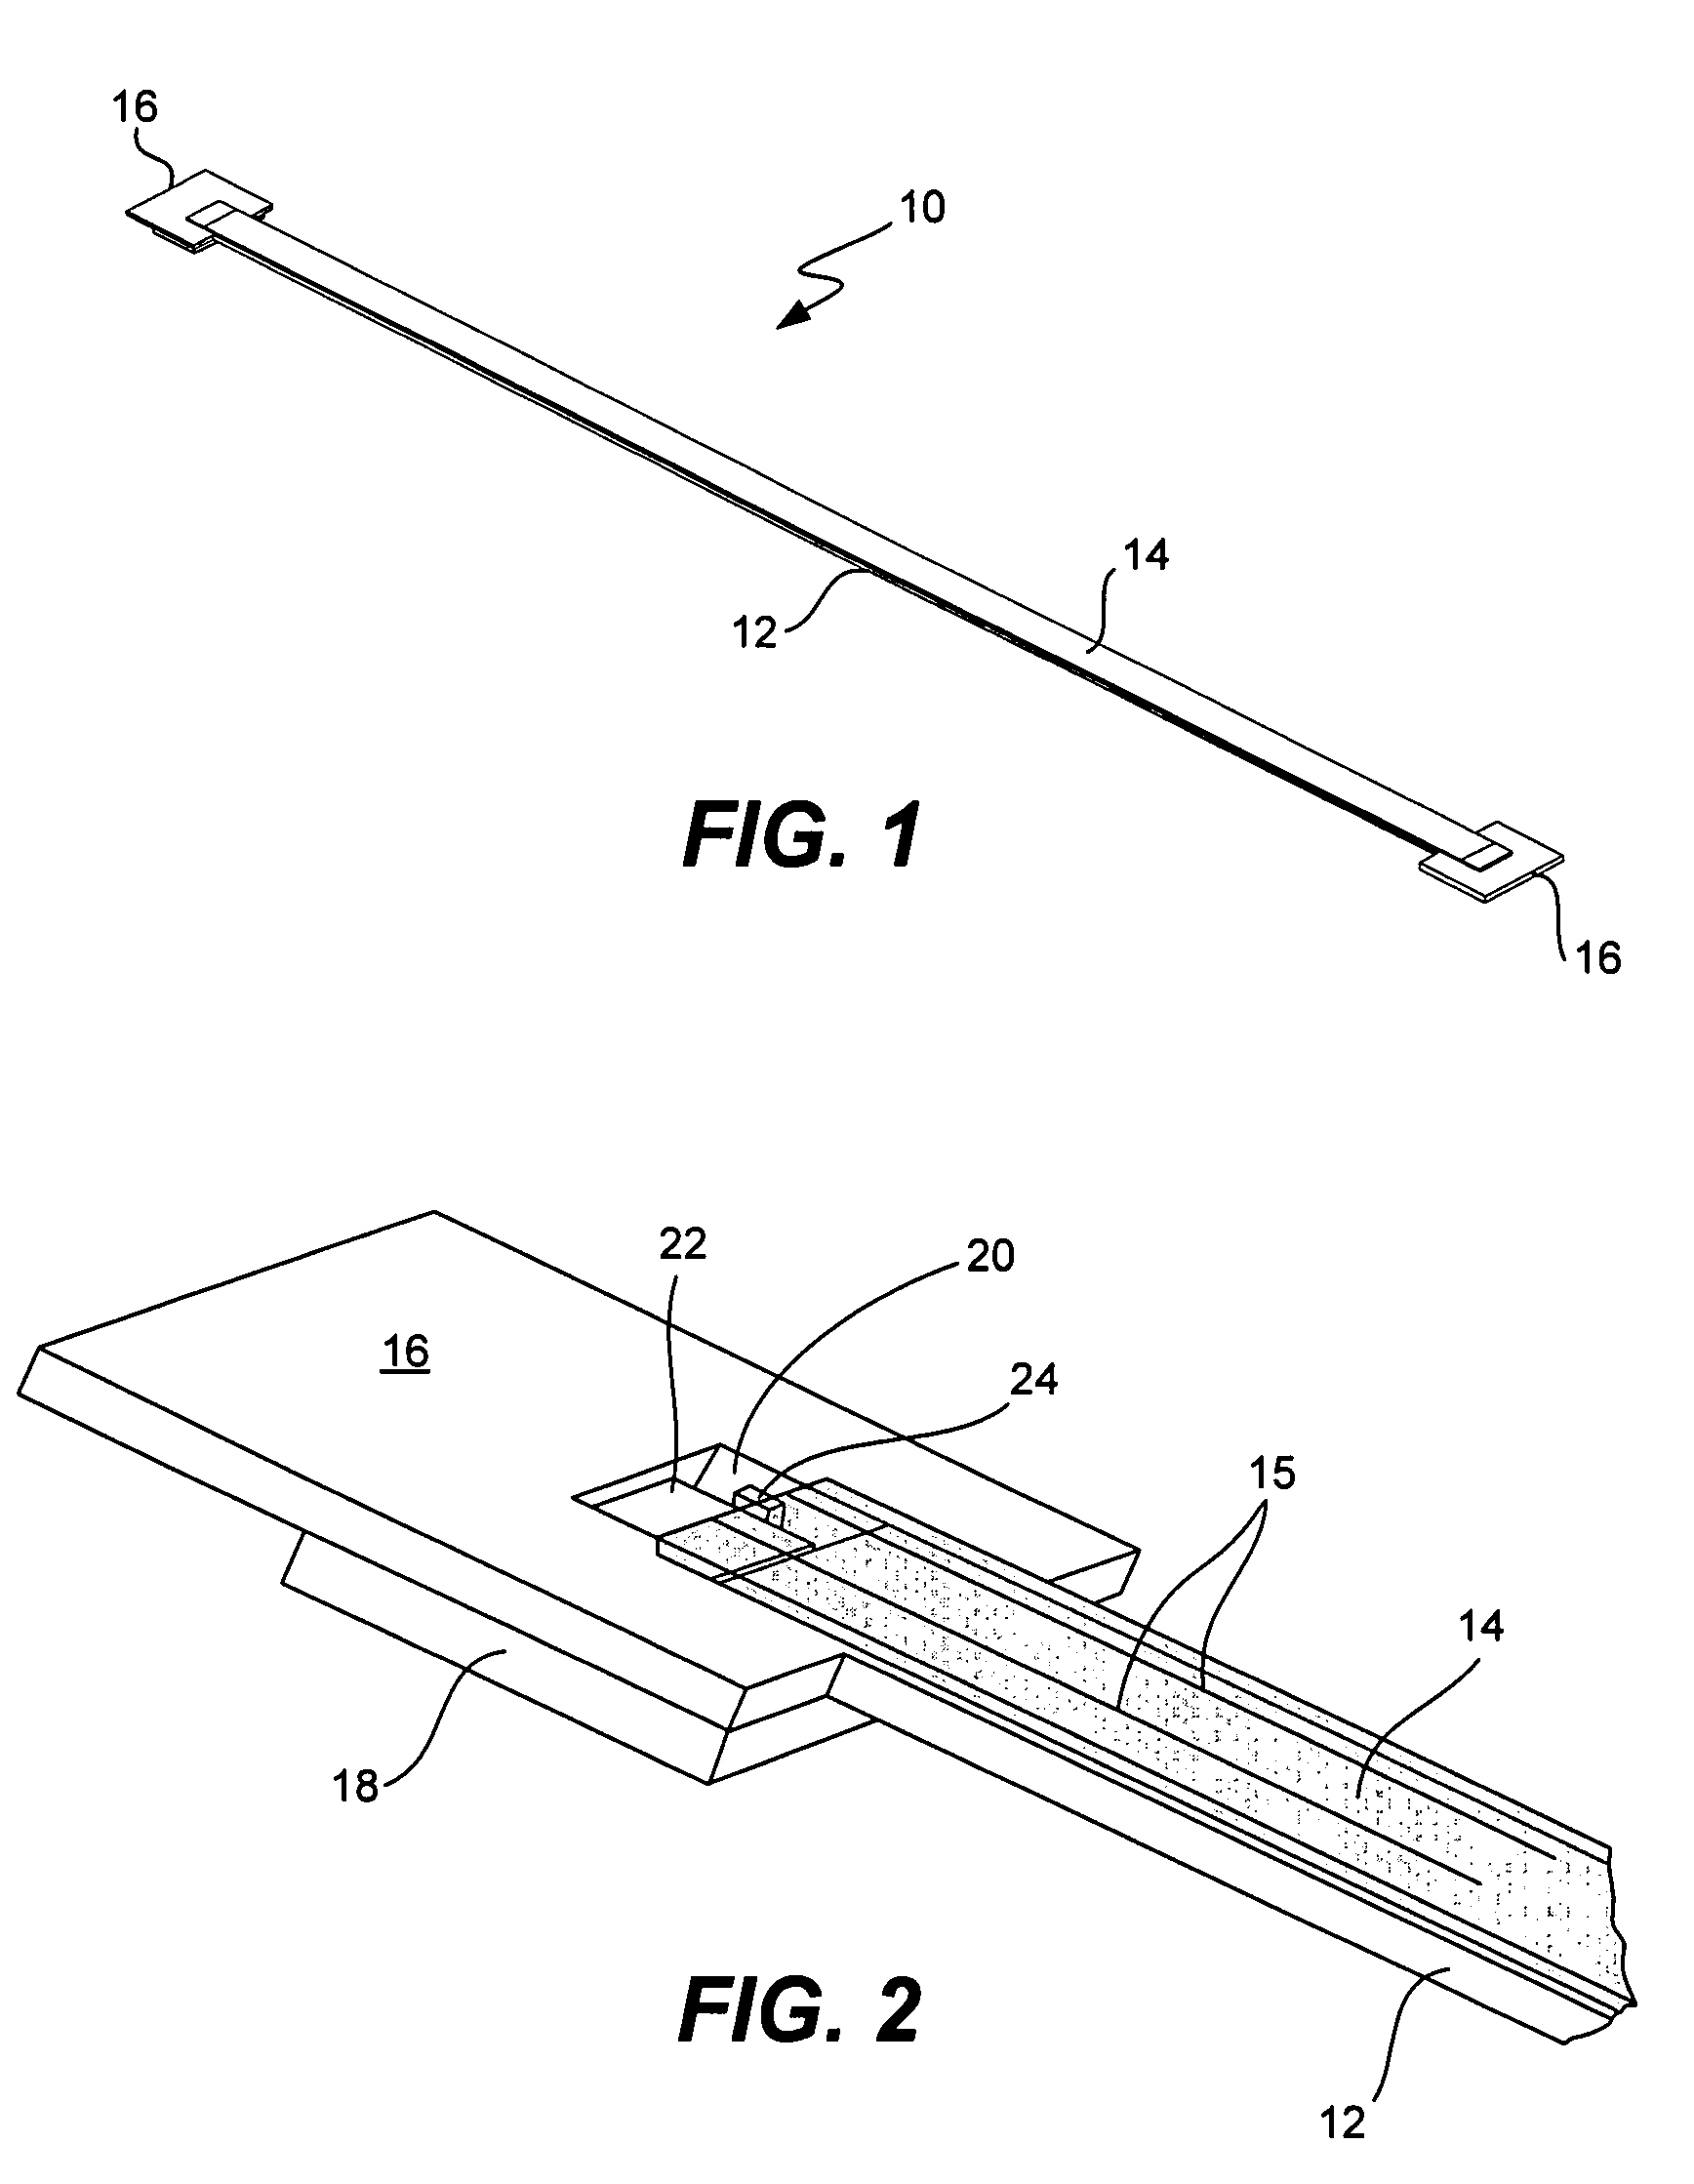 Optical-electrical flex interconnect using a flexible waveguide and flexible printed circuit board substrate